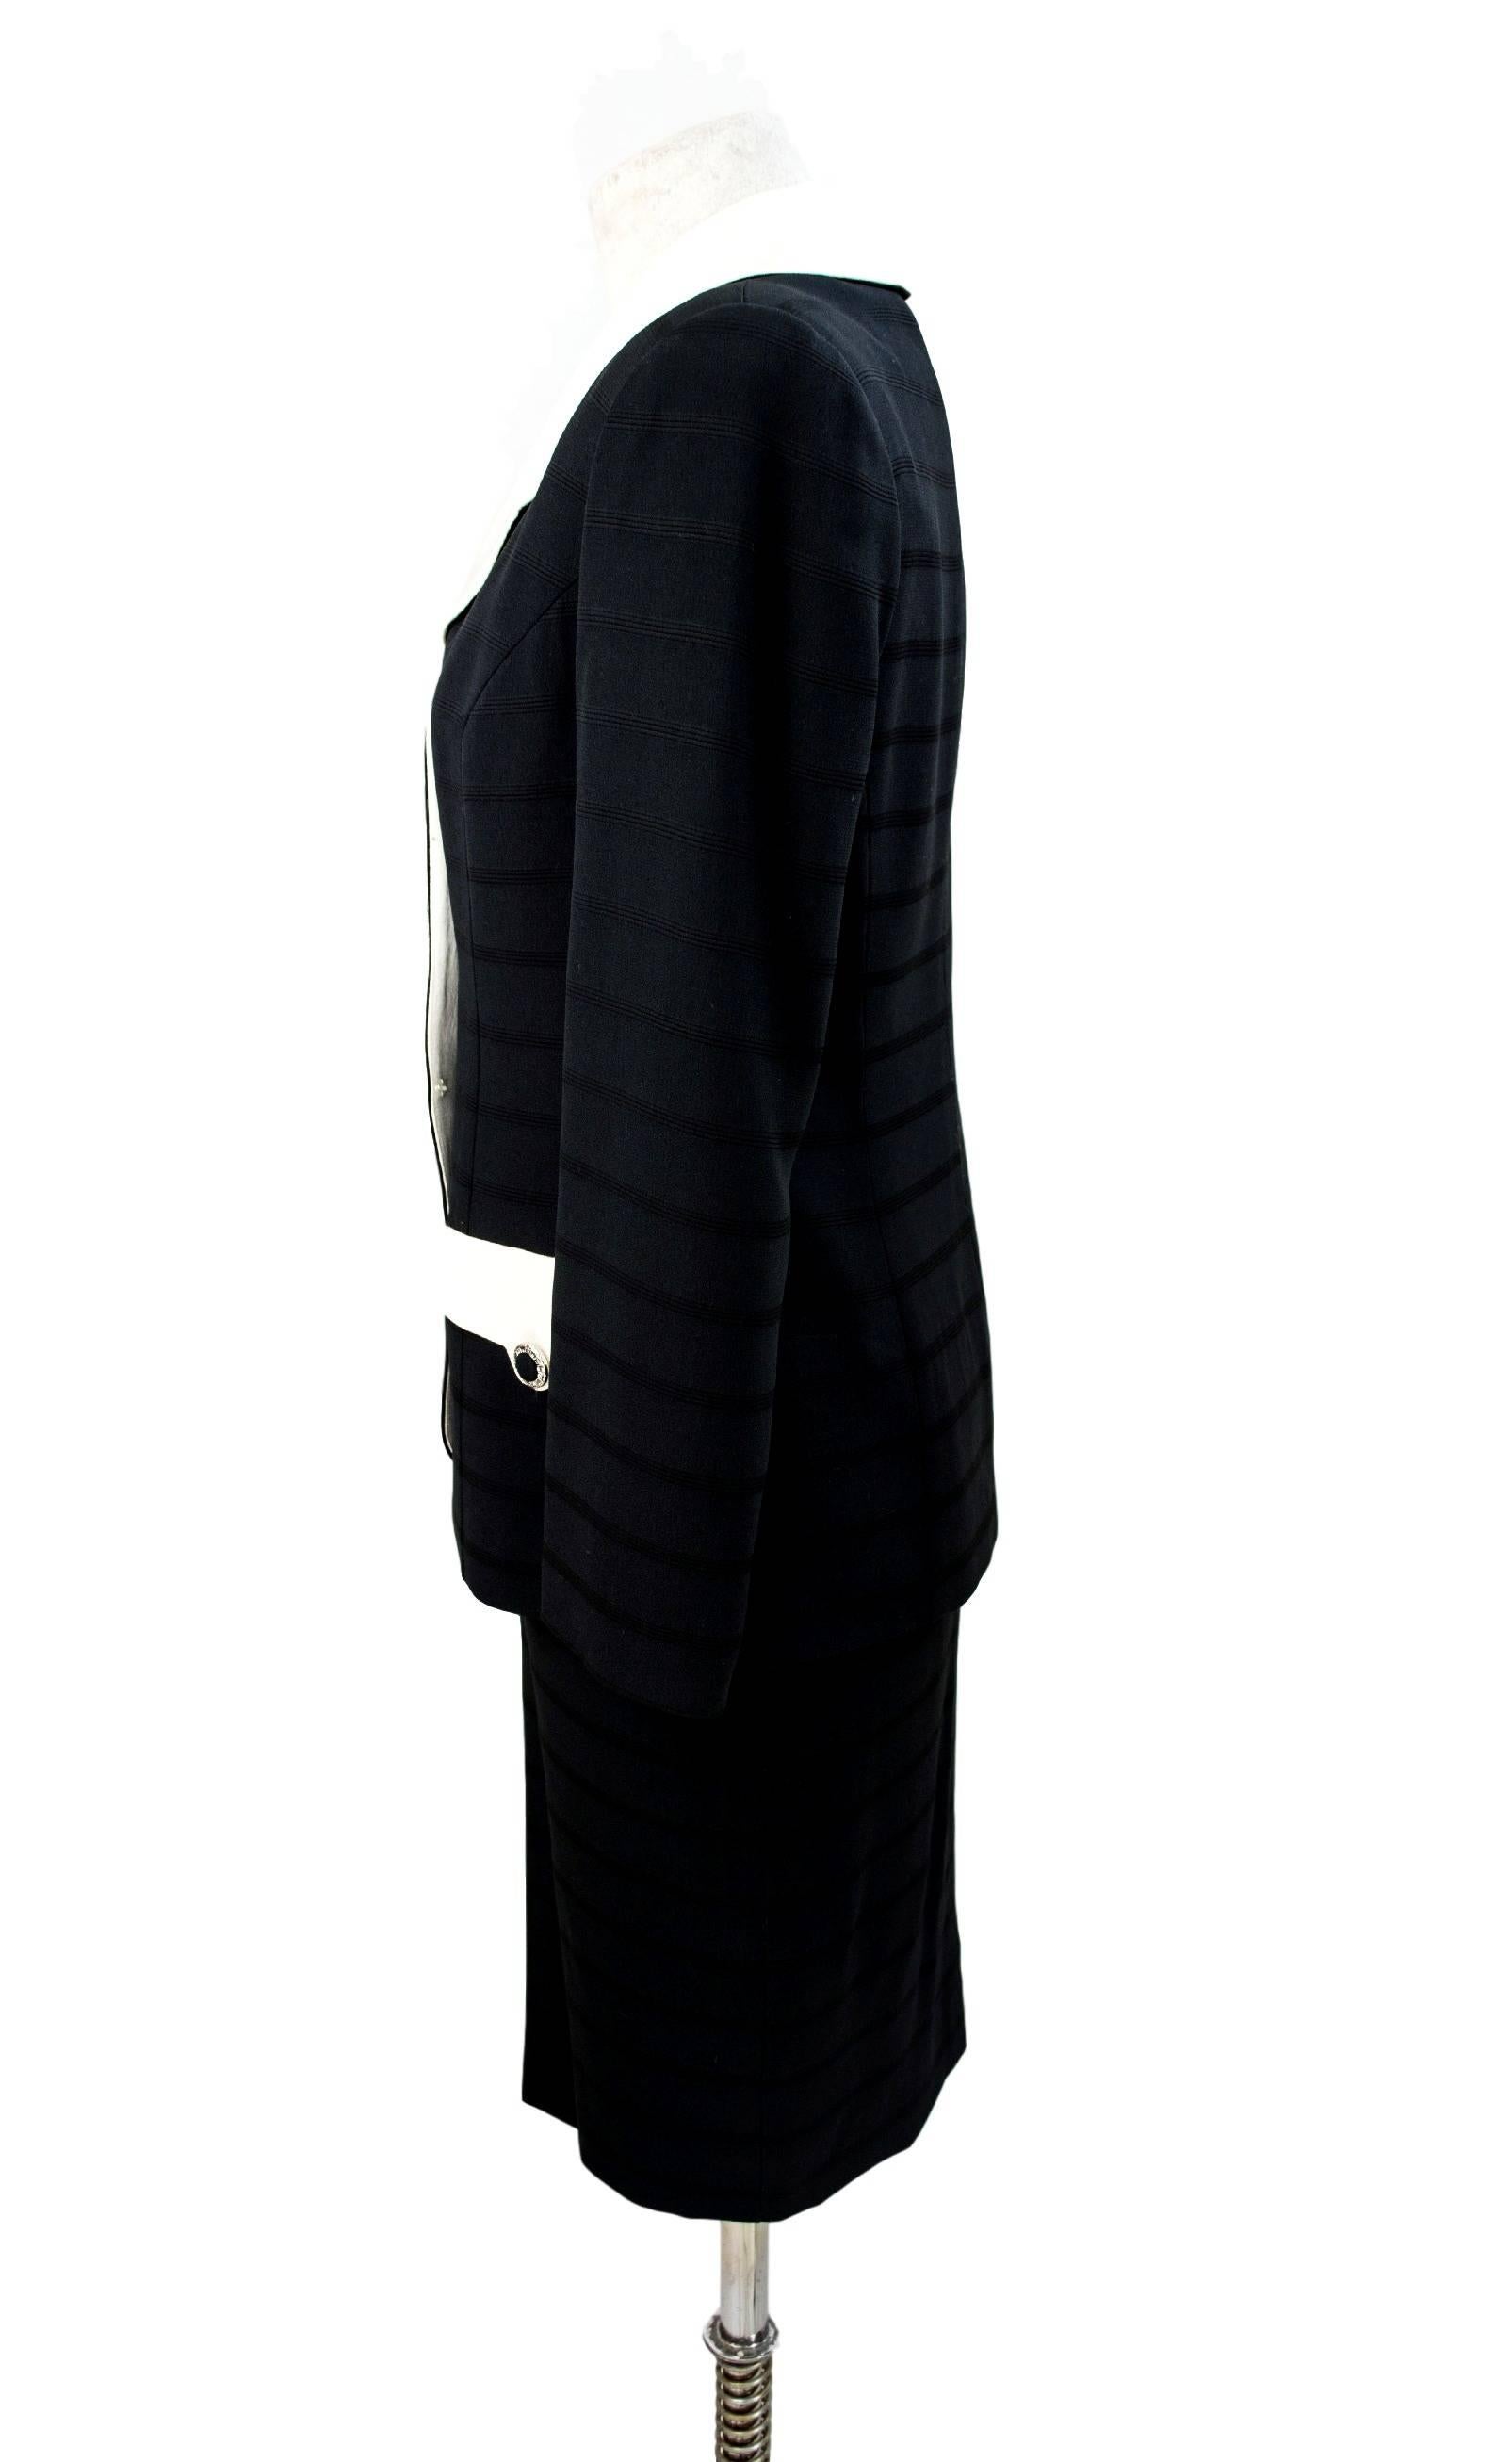 Egon Von Furstenberg set dress jacket and skirt black ribbed, the jacket has a collar and white-colored pockets, the jacket is closed with decorative buttons. Excellent condition.

Size: 44 (IT) =  38 (NL/DE)

Measures jacket:
Shoulders: 44